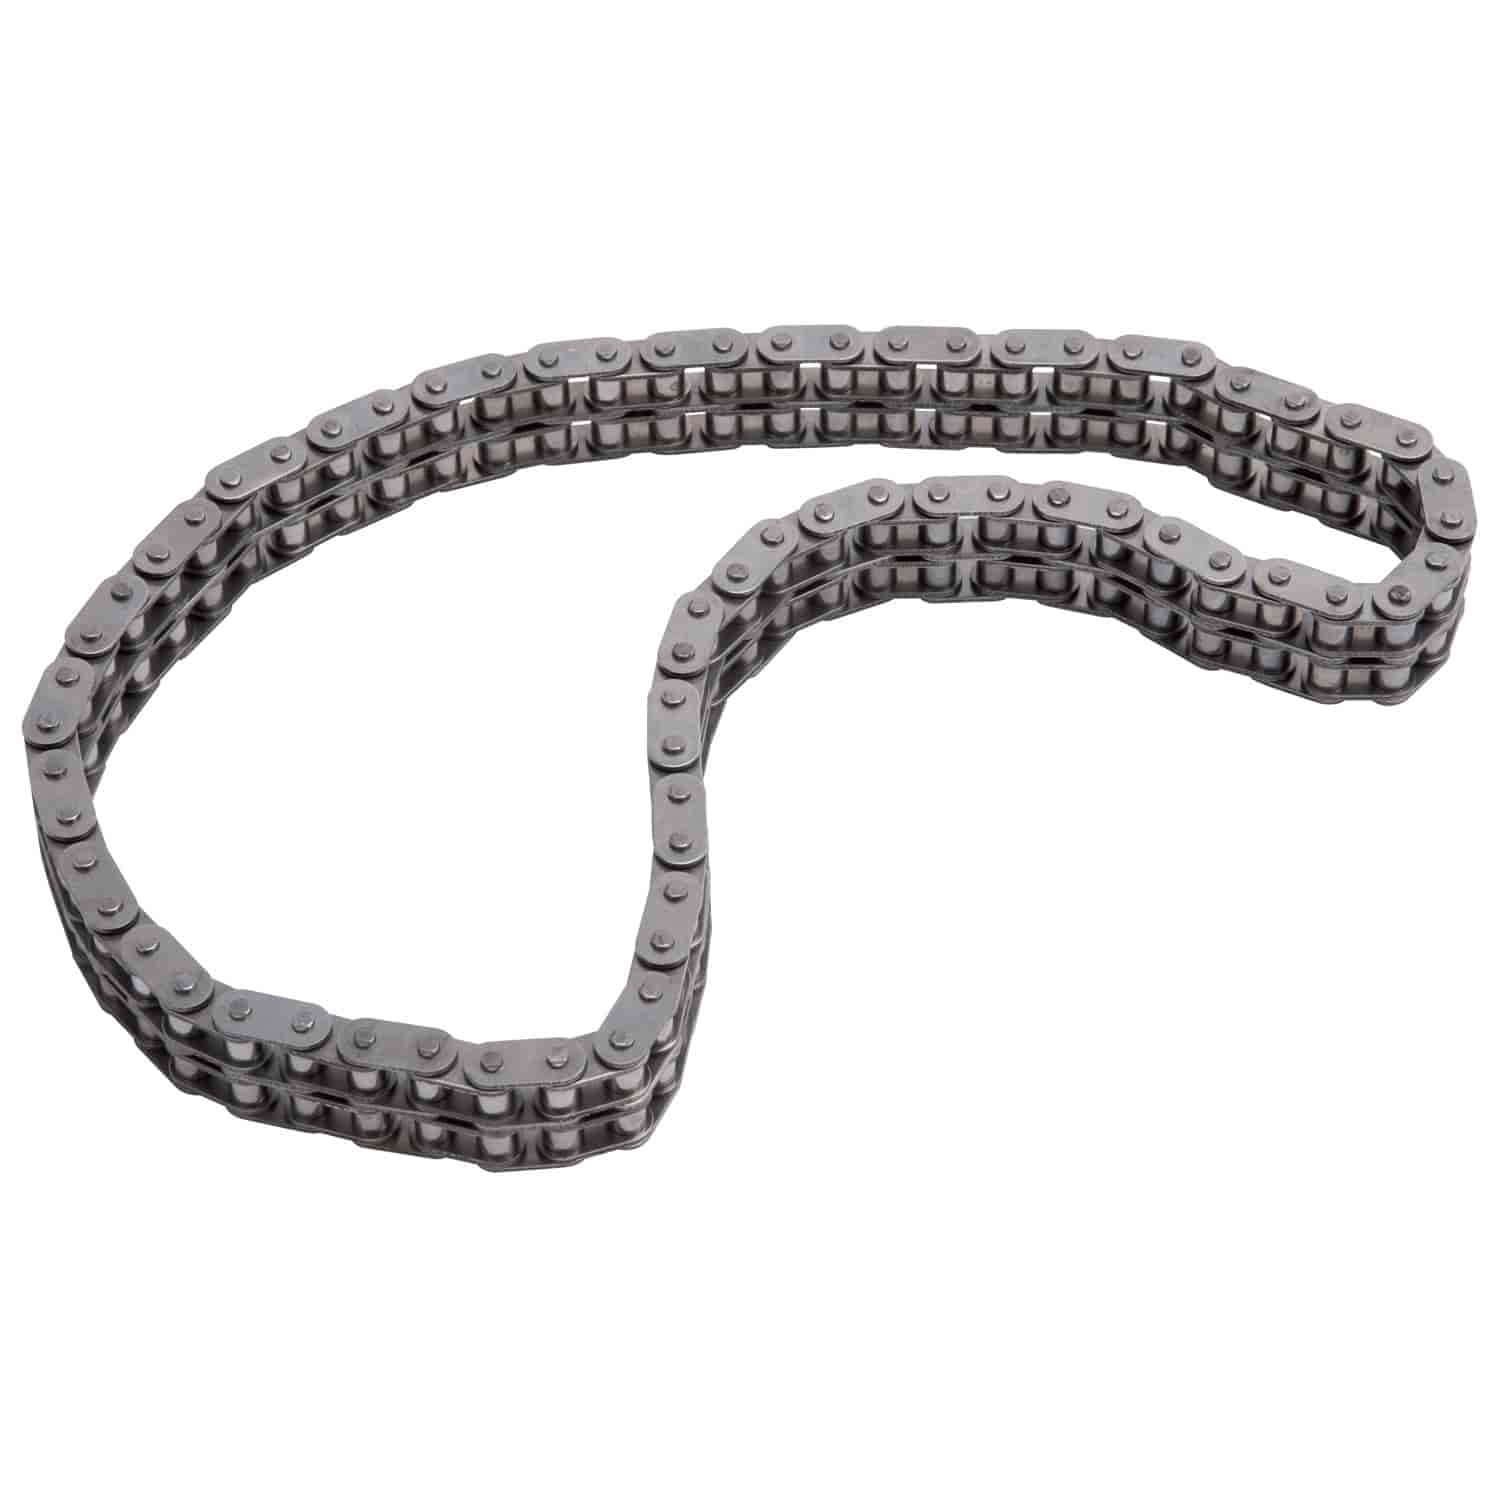 Replacement Timing Chain For P/N 350-7800/7814/7820